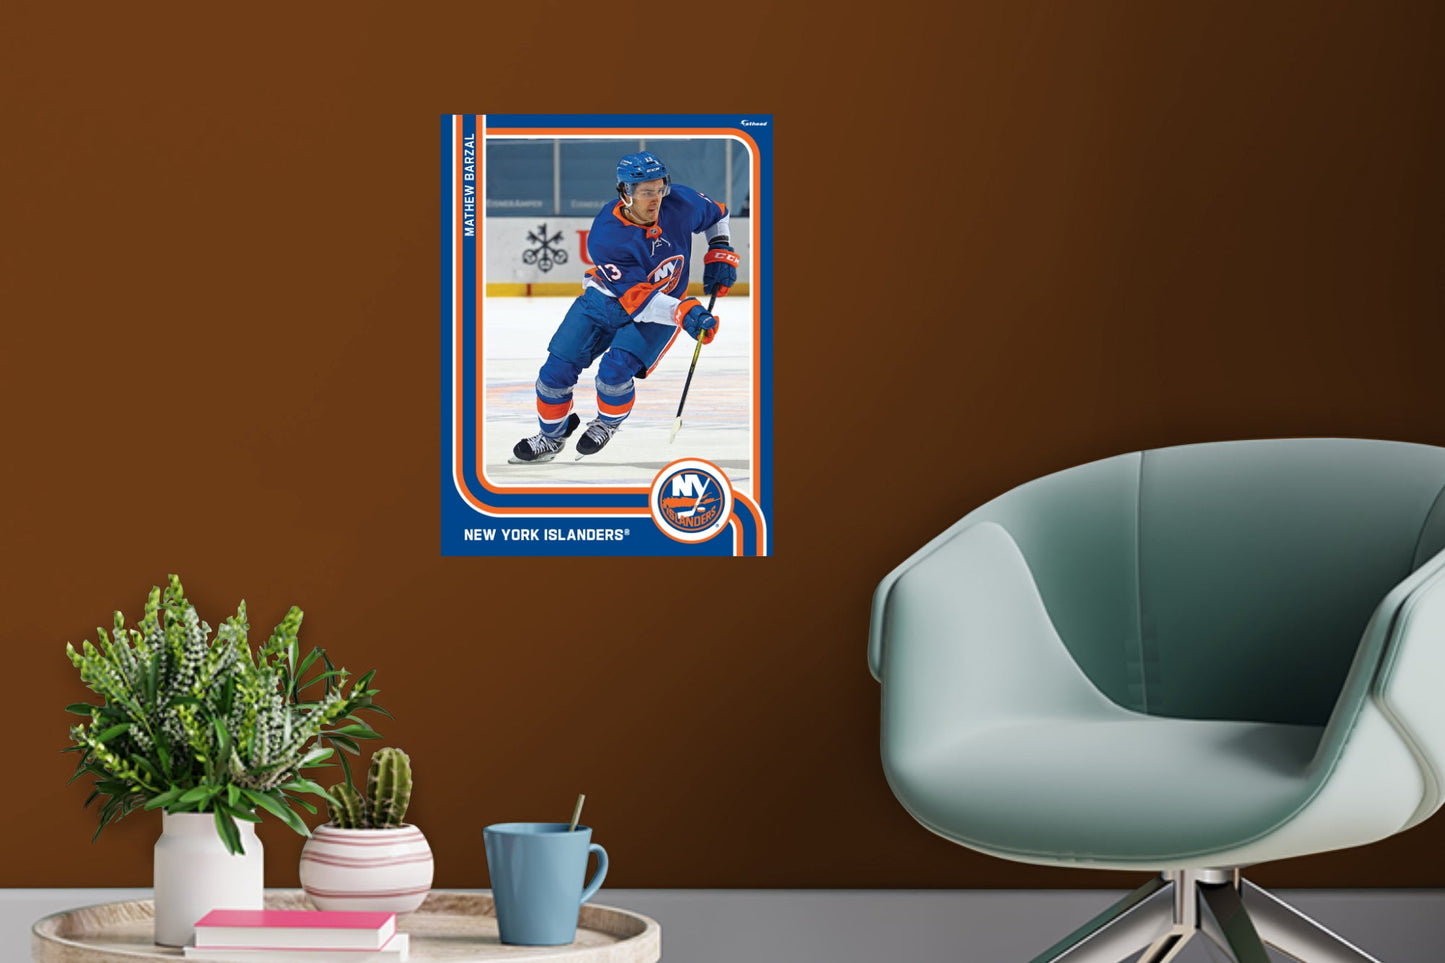 New York Islanders: Mathew Barzal Poster - Officially Licensed NHL Removable Adhesive Decal